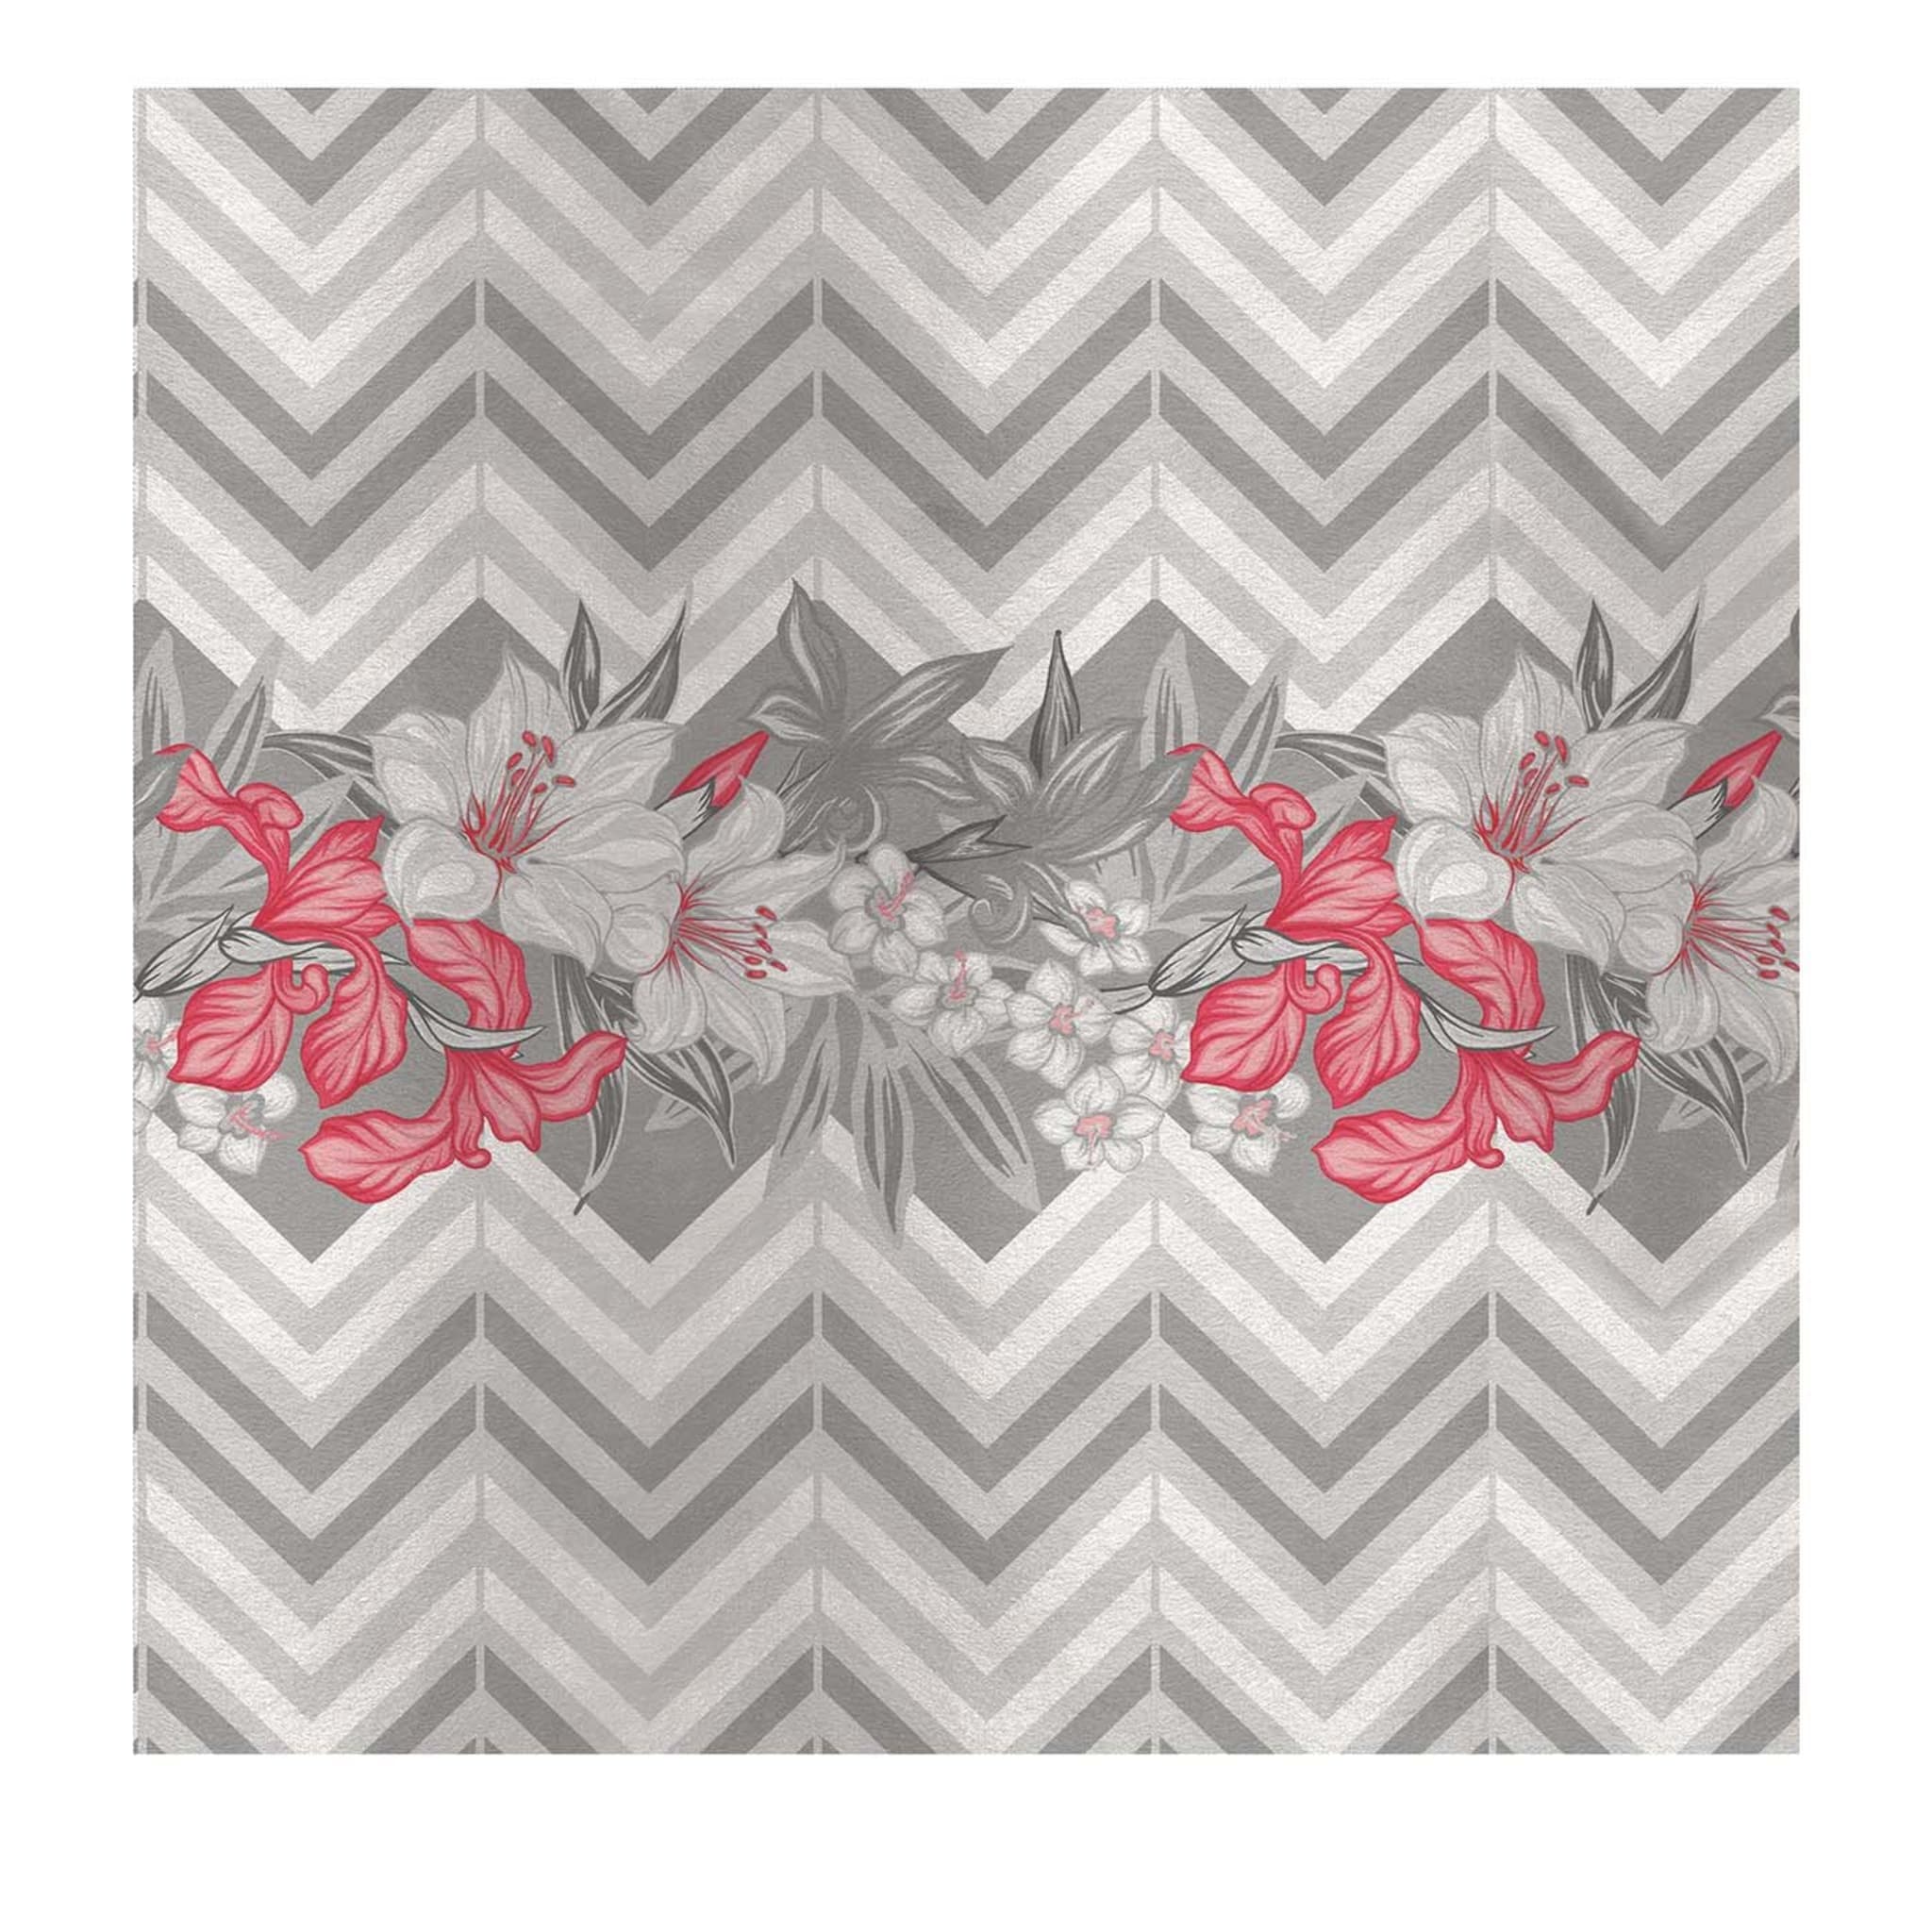 Flowers and Chevron Pattern Grey Panel #2 - Main view